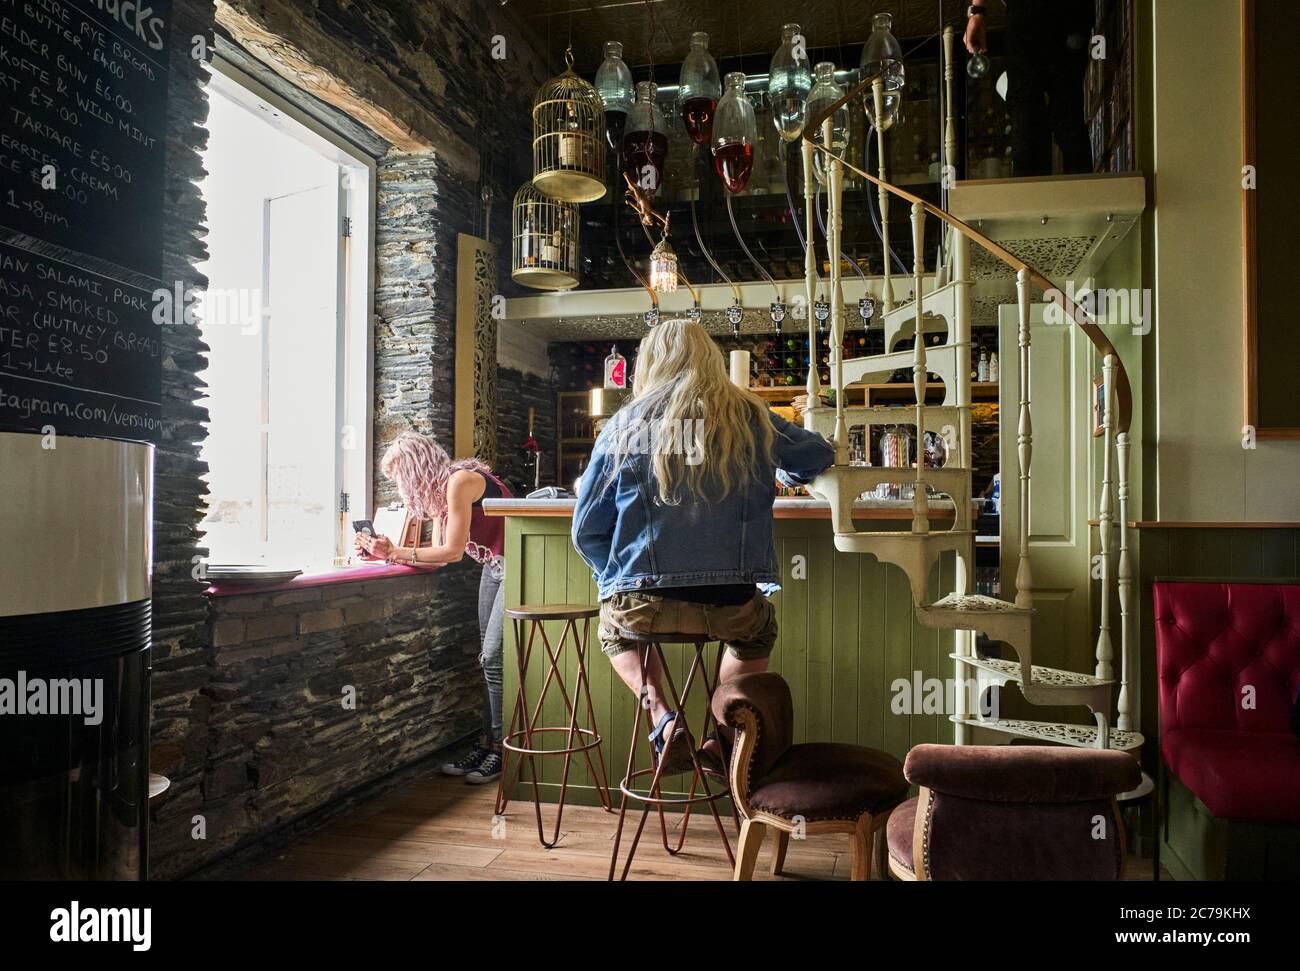 Interior of Foraging Vintners bar in Port Erin interior with man with long hair sitting at the bar Stock Photo